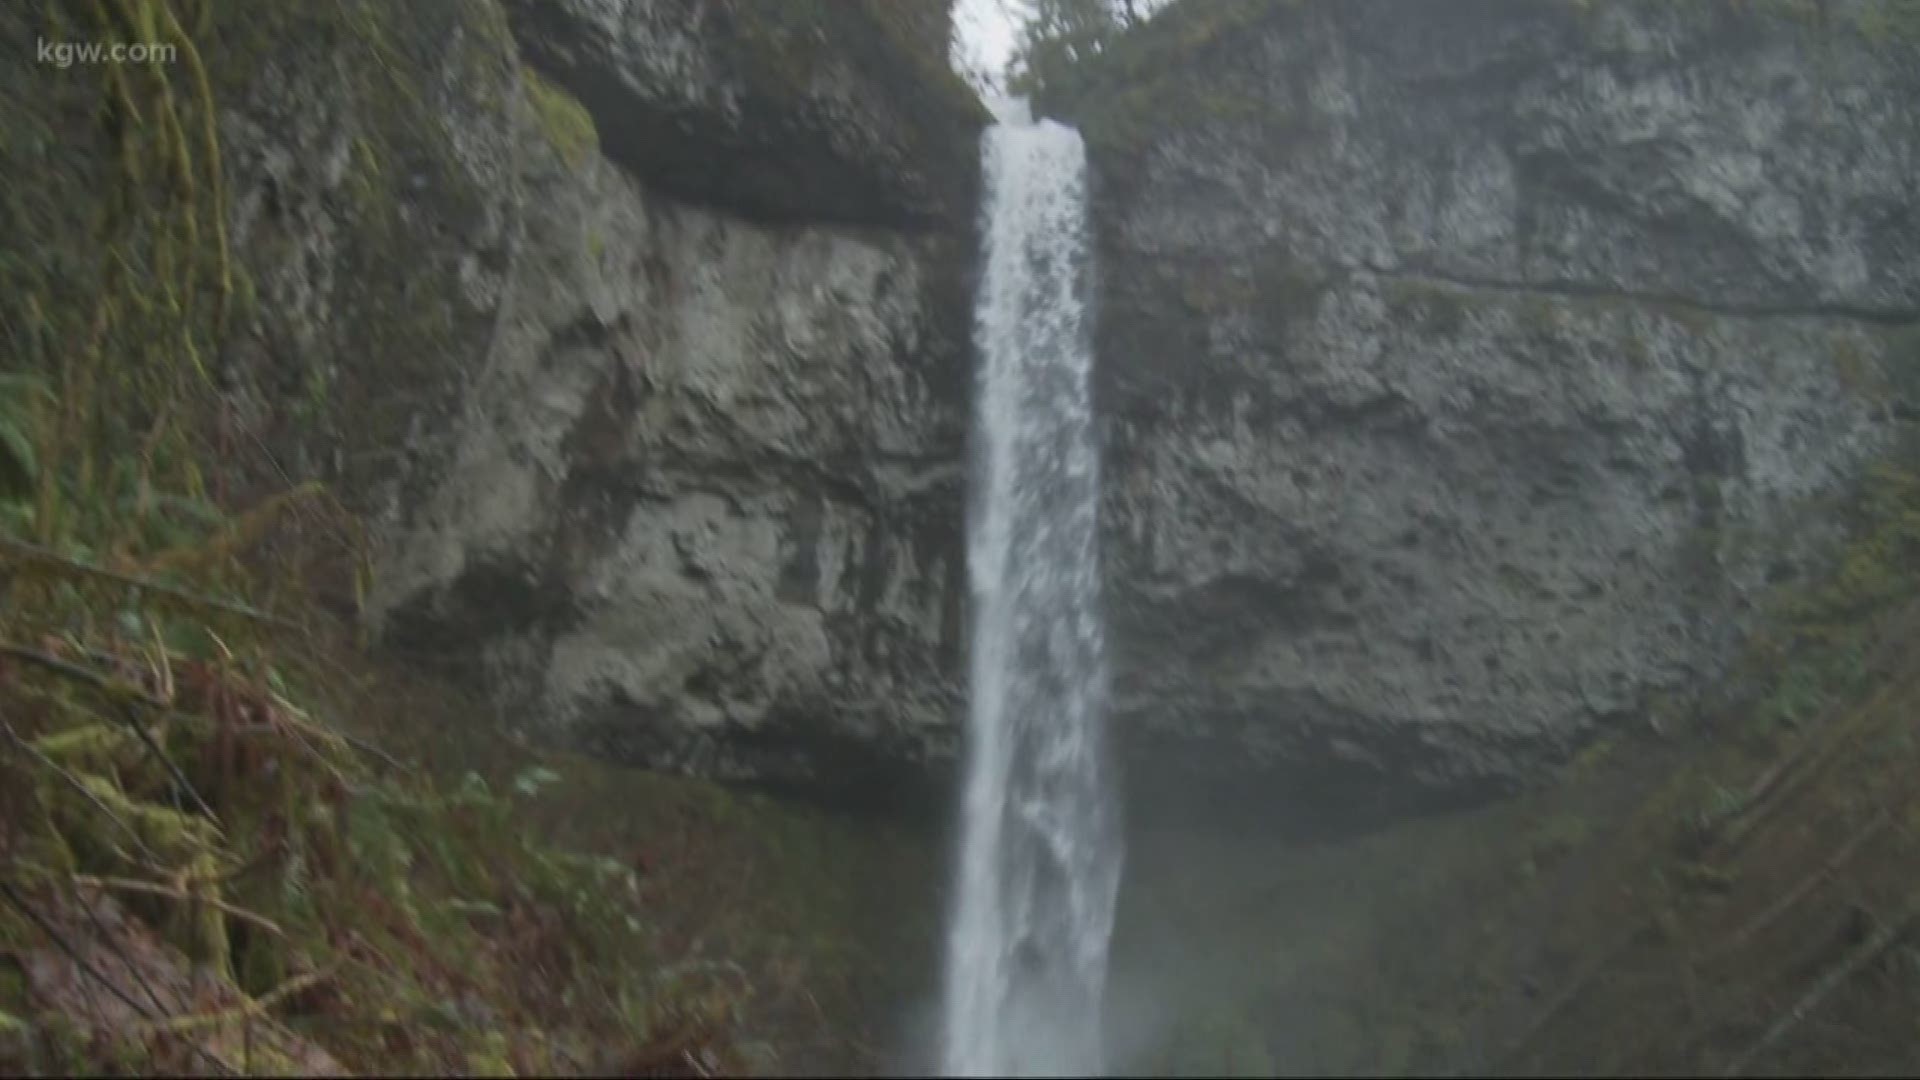 Grant McOmie takes us to Oregon's Niagara Falls, tucked into the Coast Range in the Siuslaw National Forest.